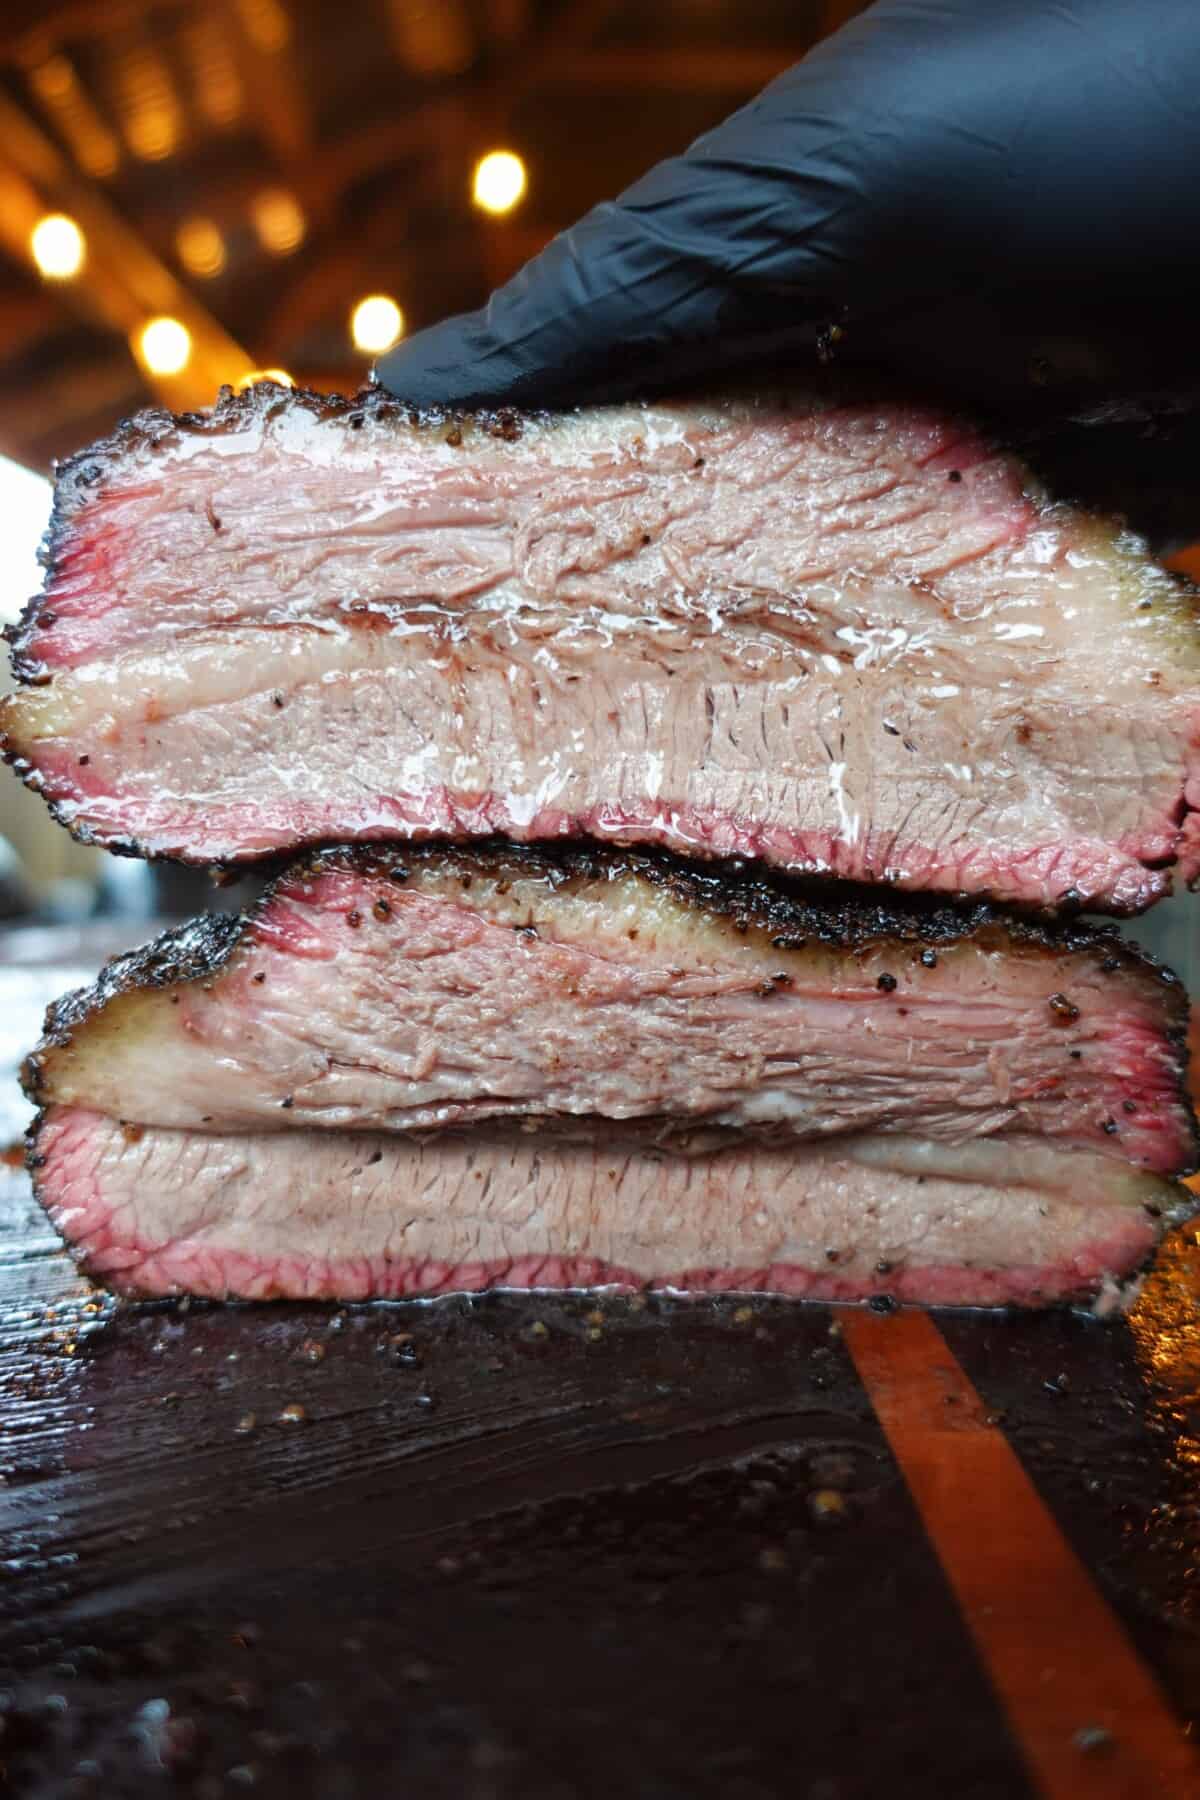 The sliced shot of a smoked brisket.